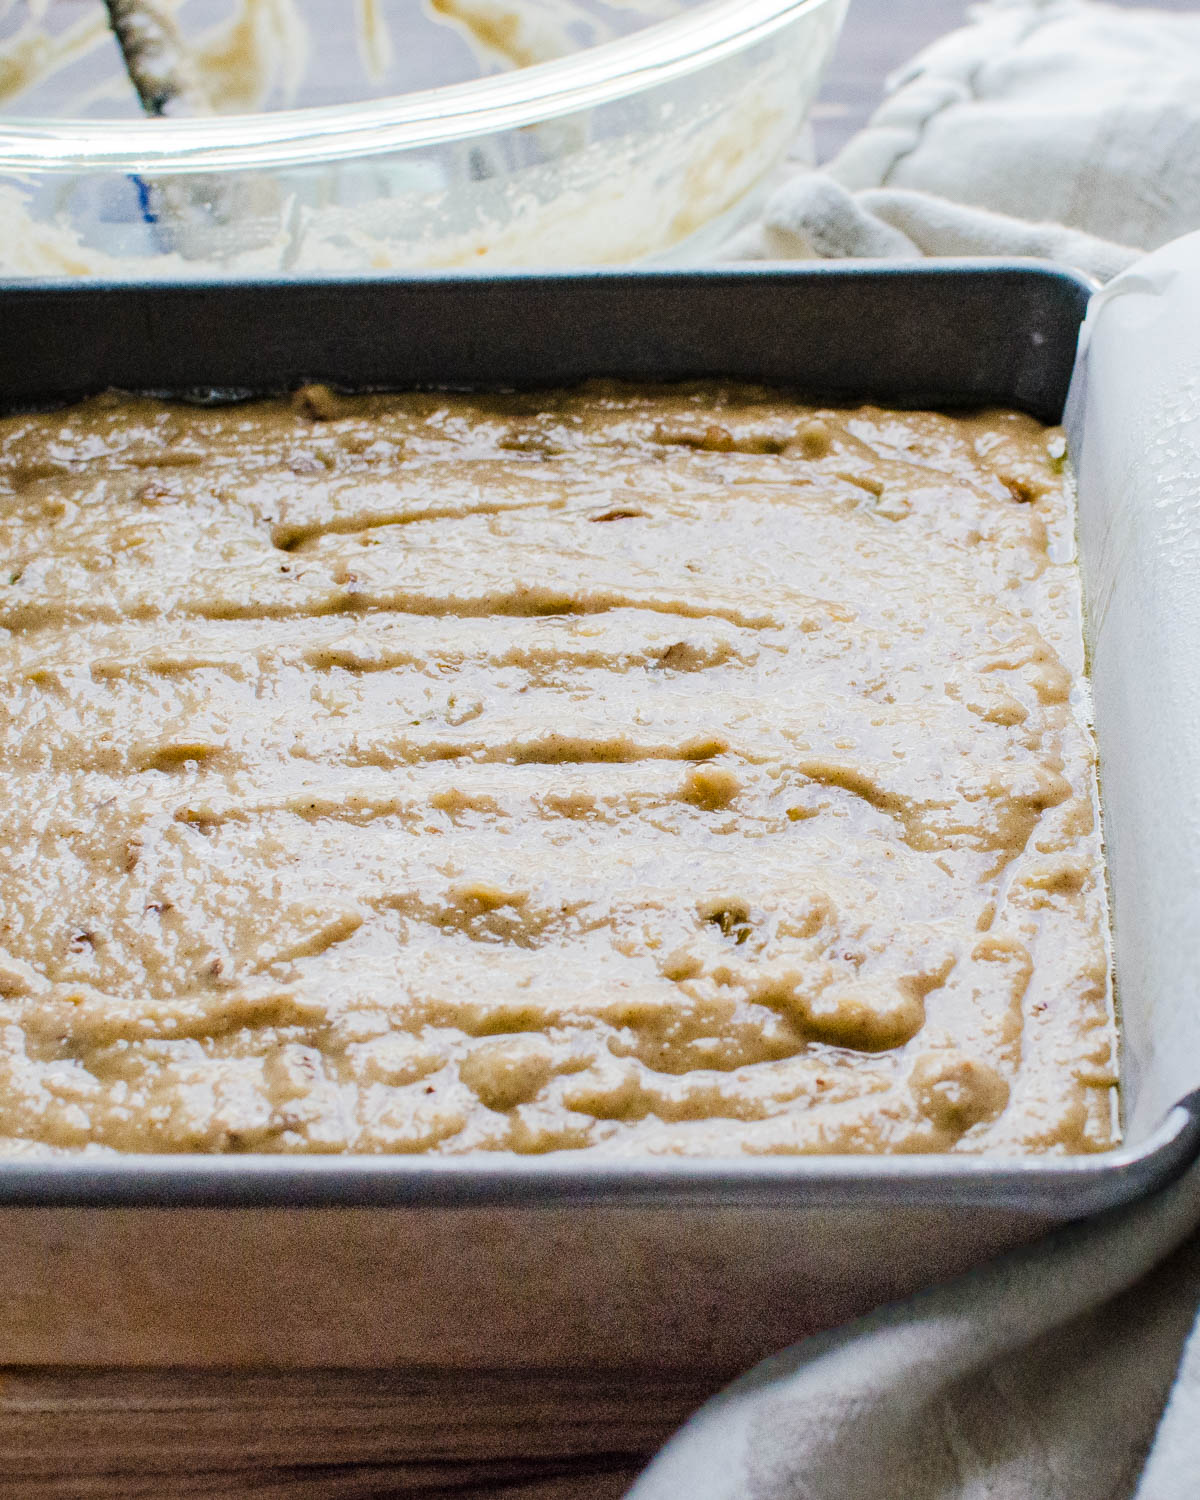 Pouring applesauce cake batter into the cake pan.